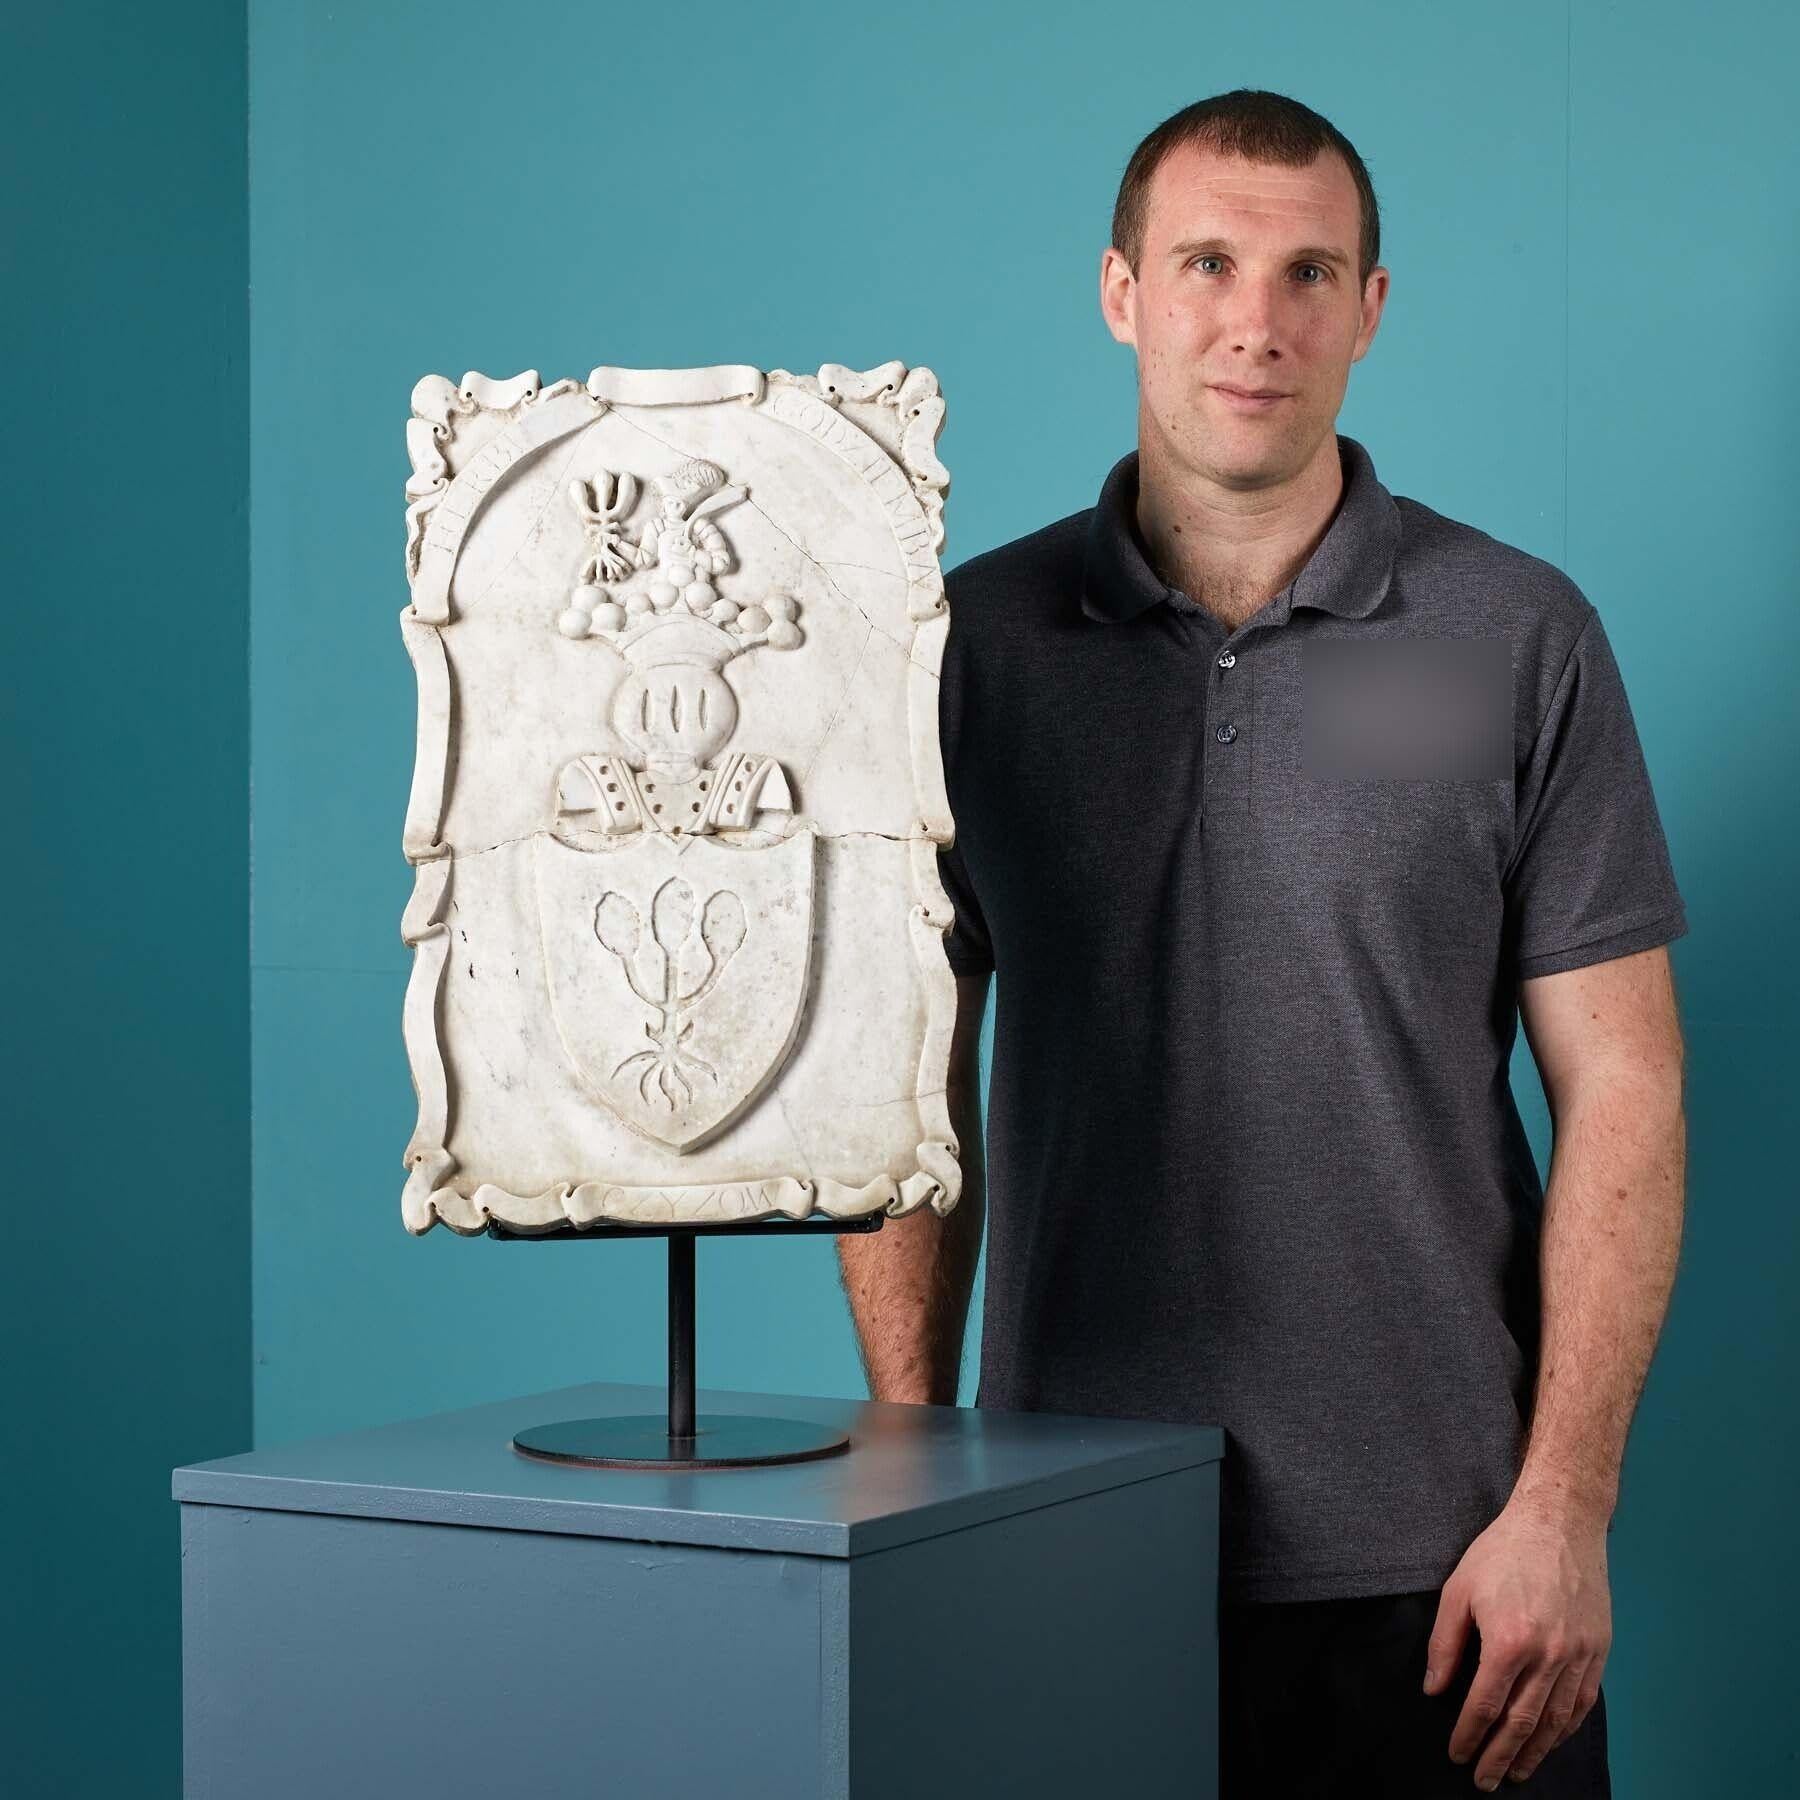 Antique carved marble armorial panel. A Polish Coat of Arms. Wonderfully detailed and presented on Carrara Marble with scrolling and imagery.
The design of the plaque holds a legendary history dating back to the 11th century. The soldier depicted